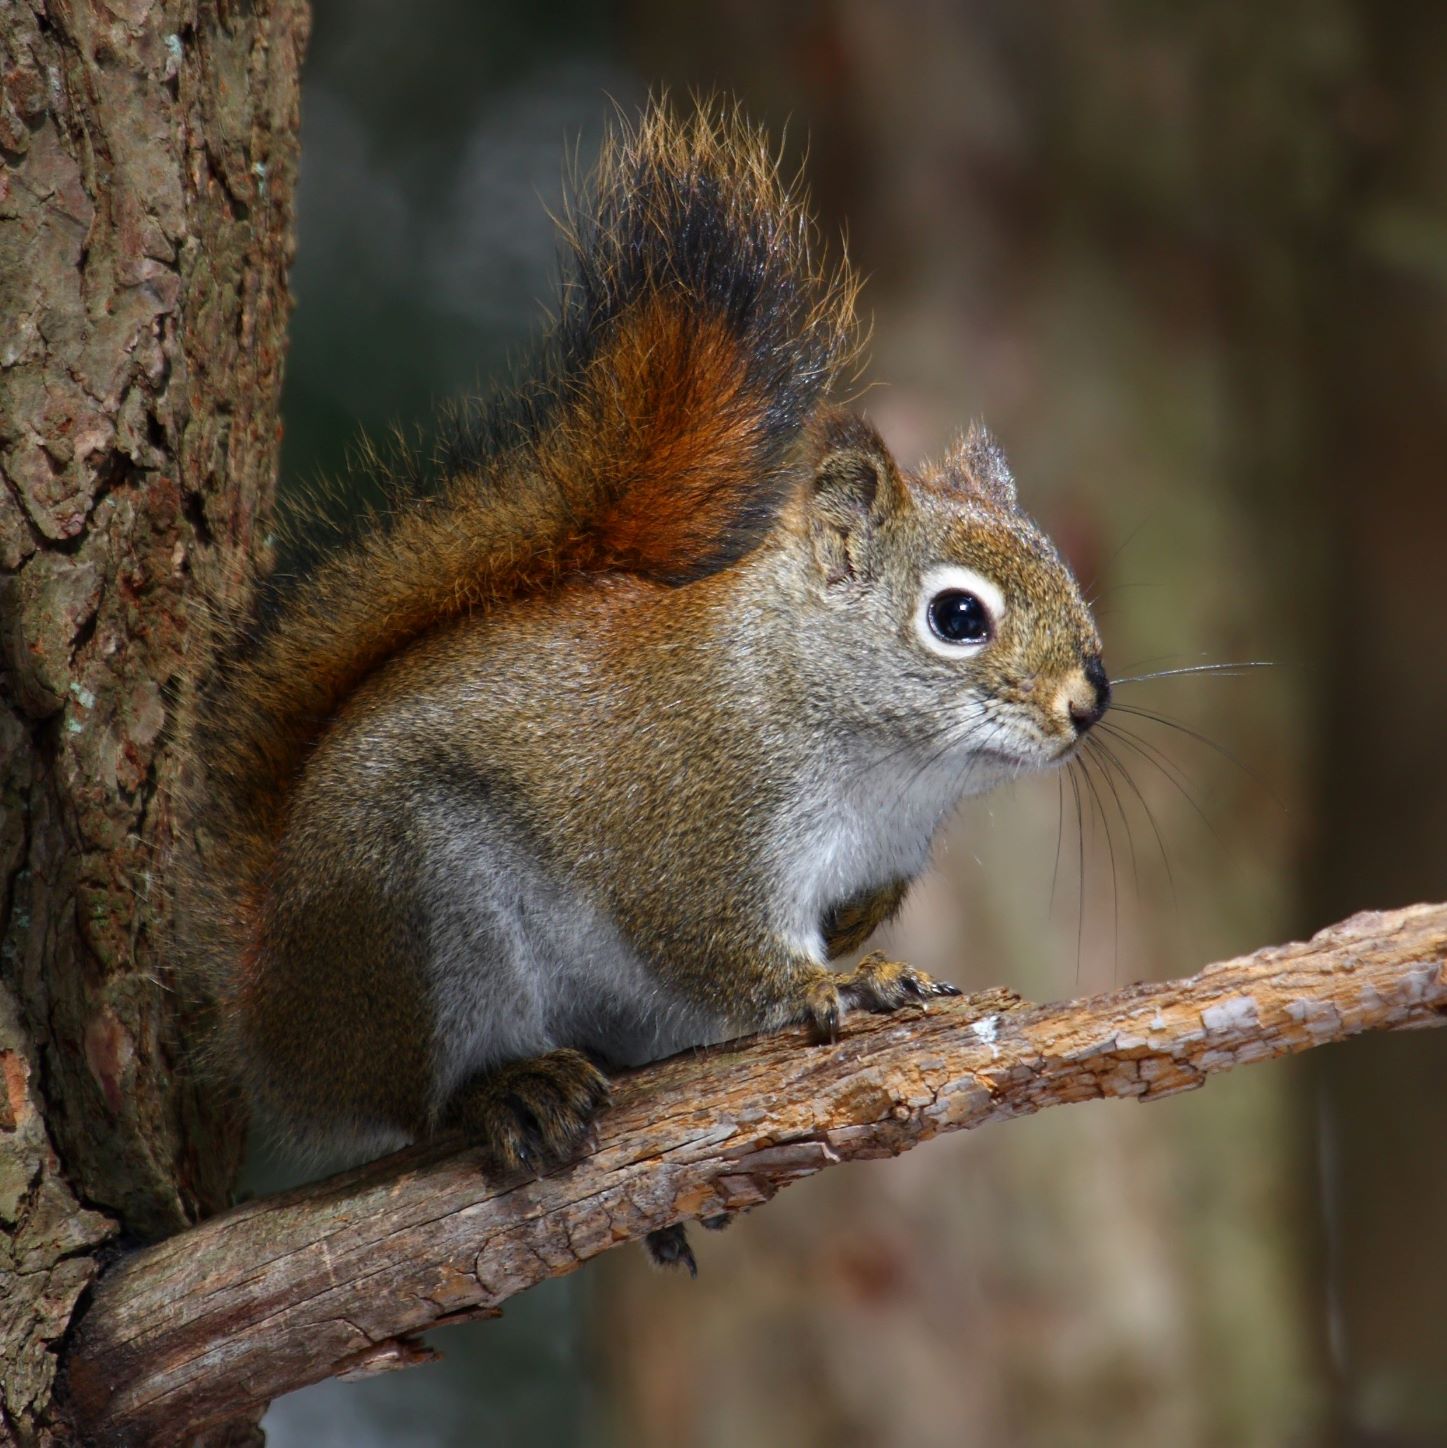 Dining Habits of the Red Squirrel